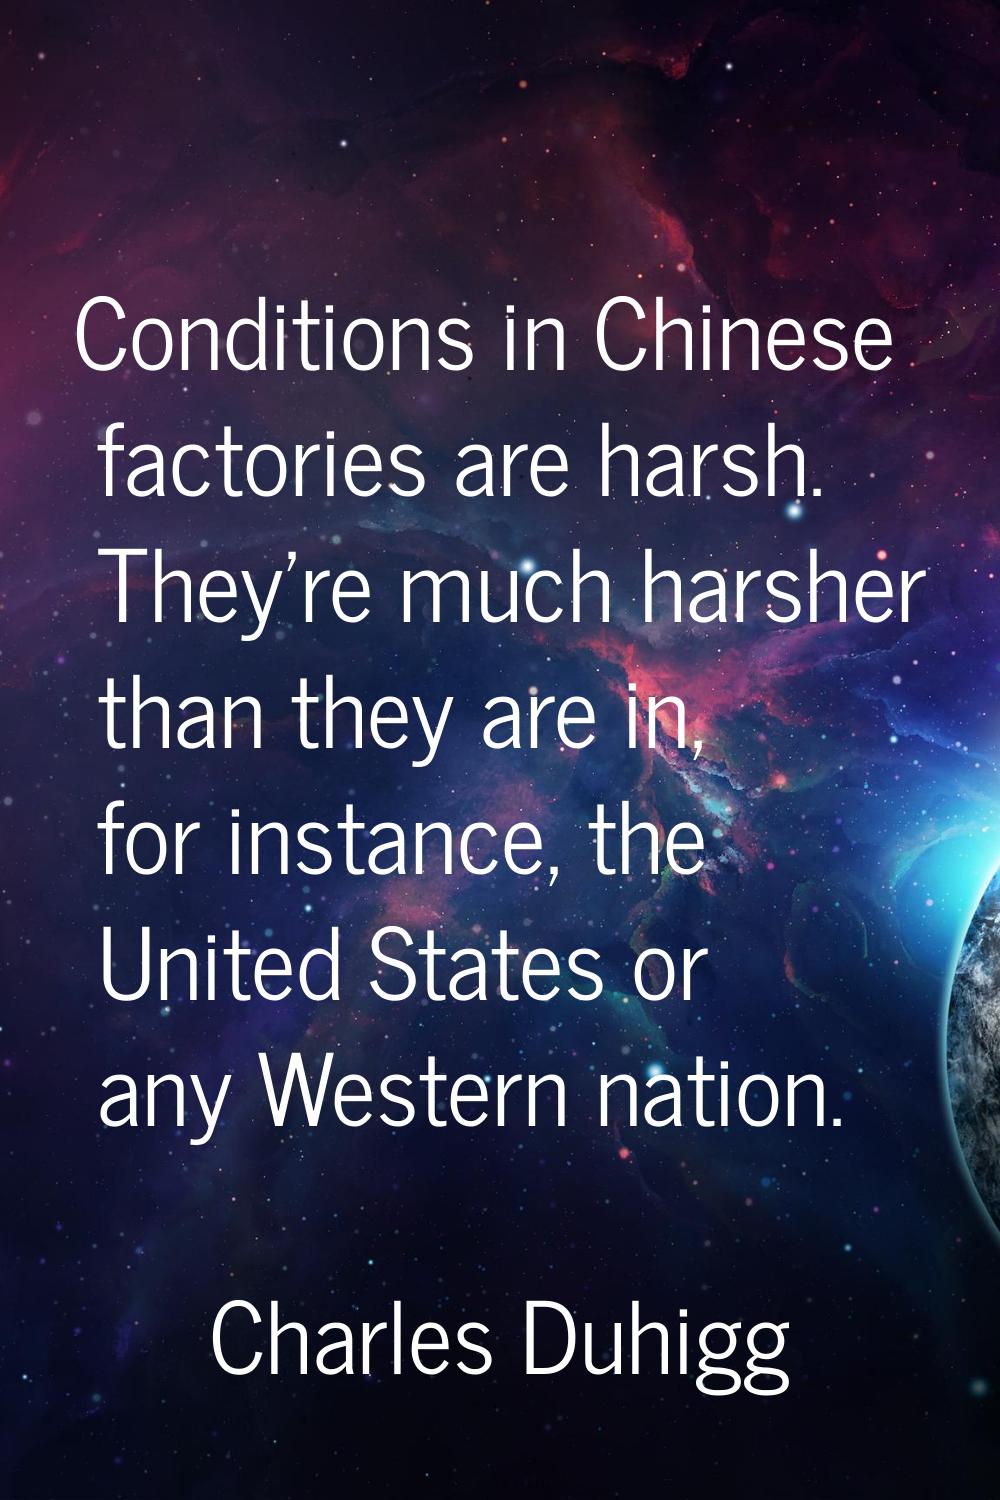 Conditions in Chinese factories are harsh. They're much harsher than they are in, for instance, the